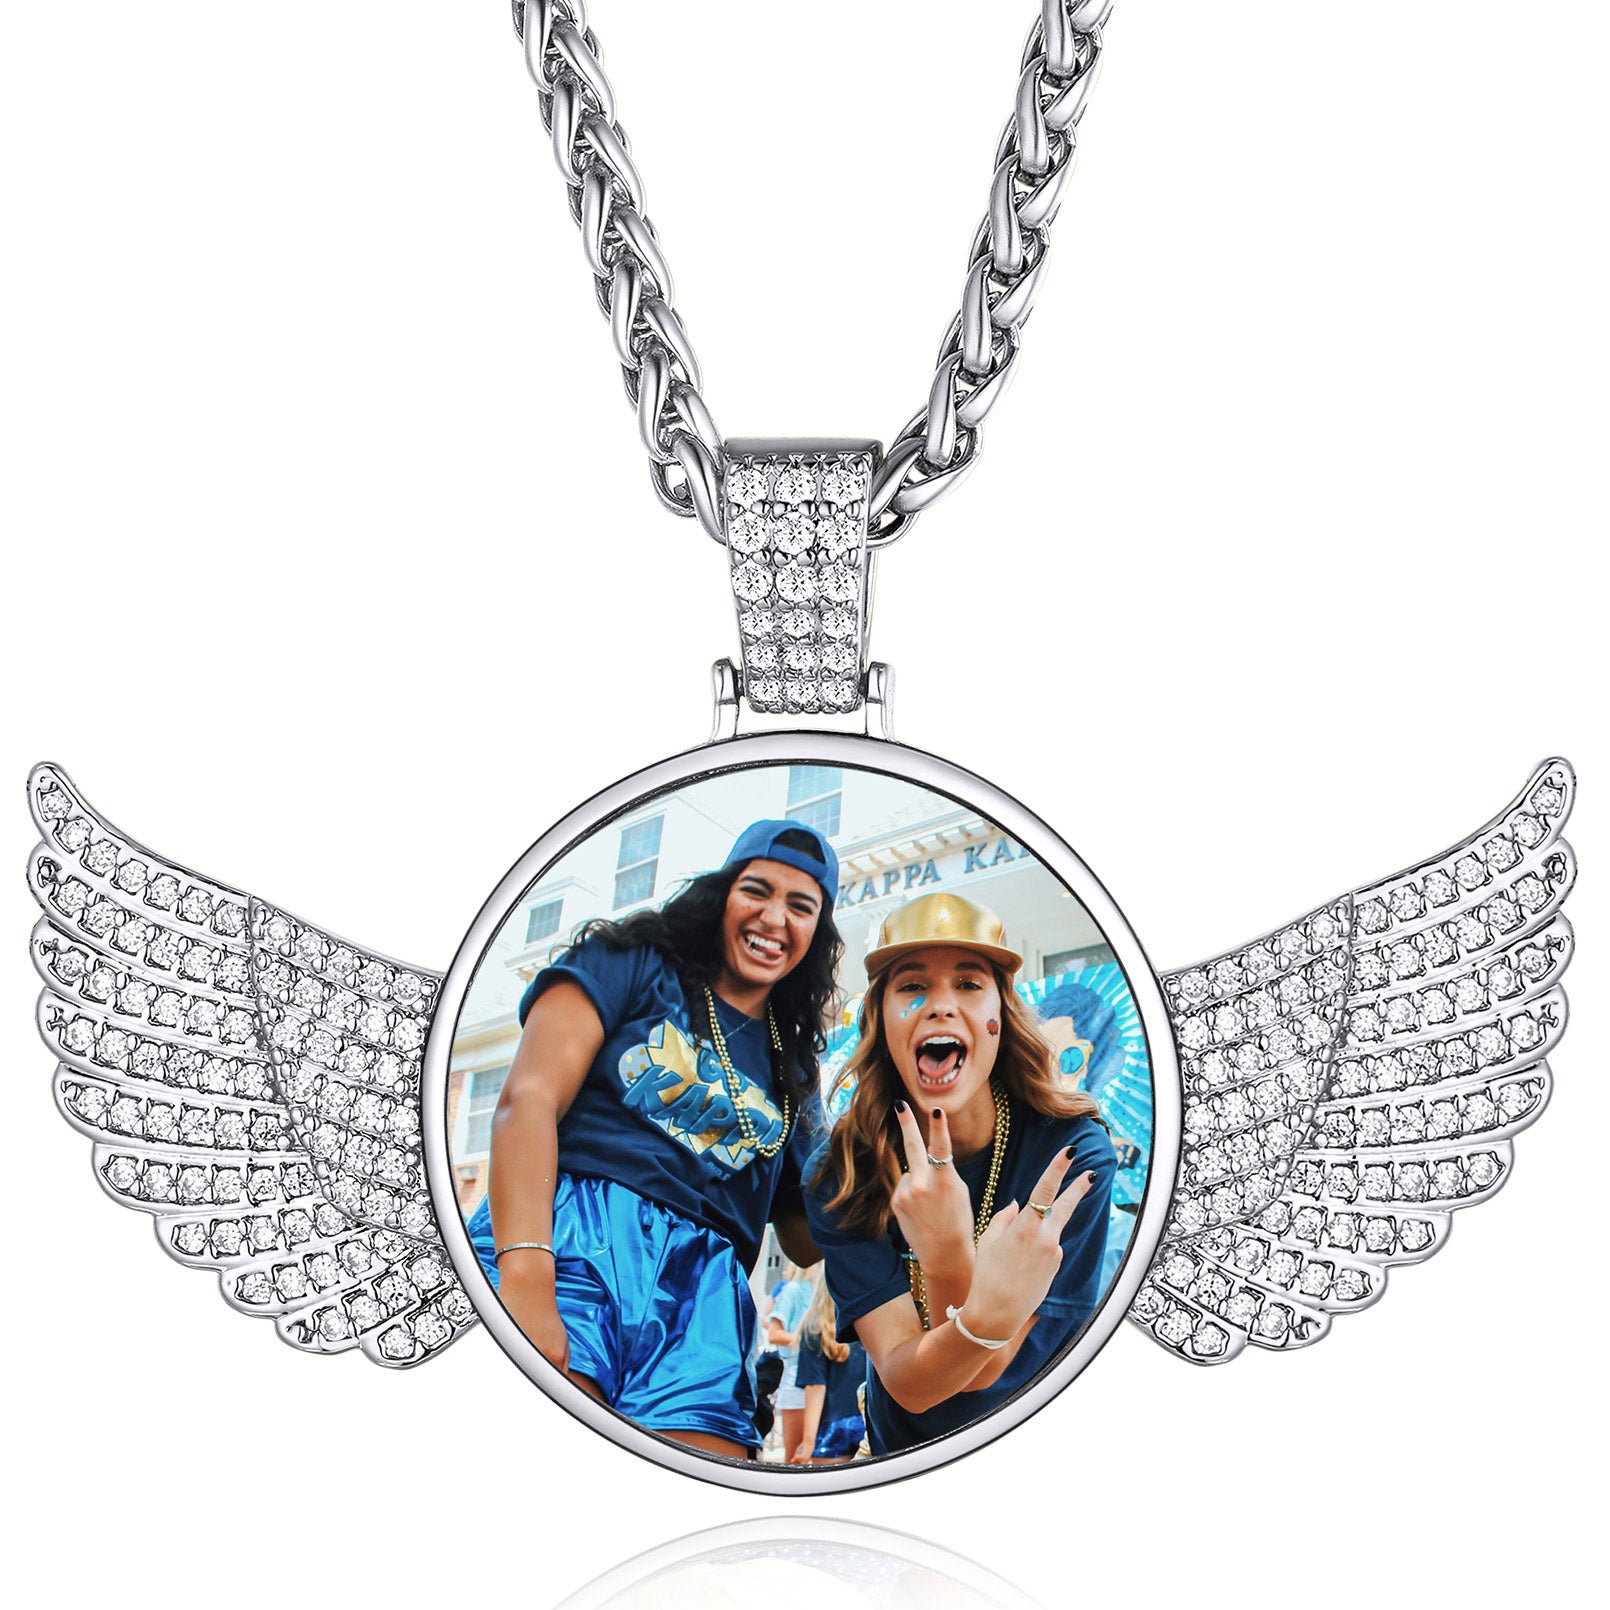 Personalized Angel Wings Picture Necklace with CZ for Men Women FaithHeart